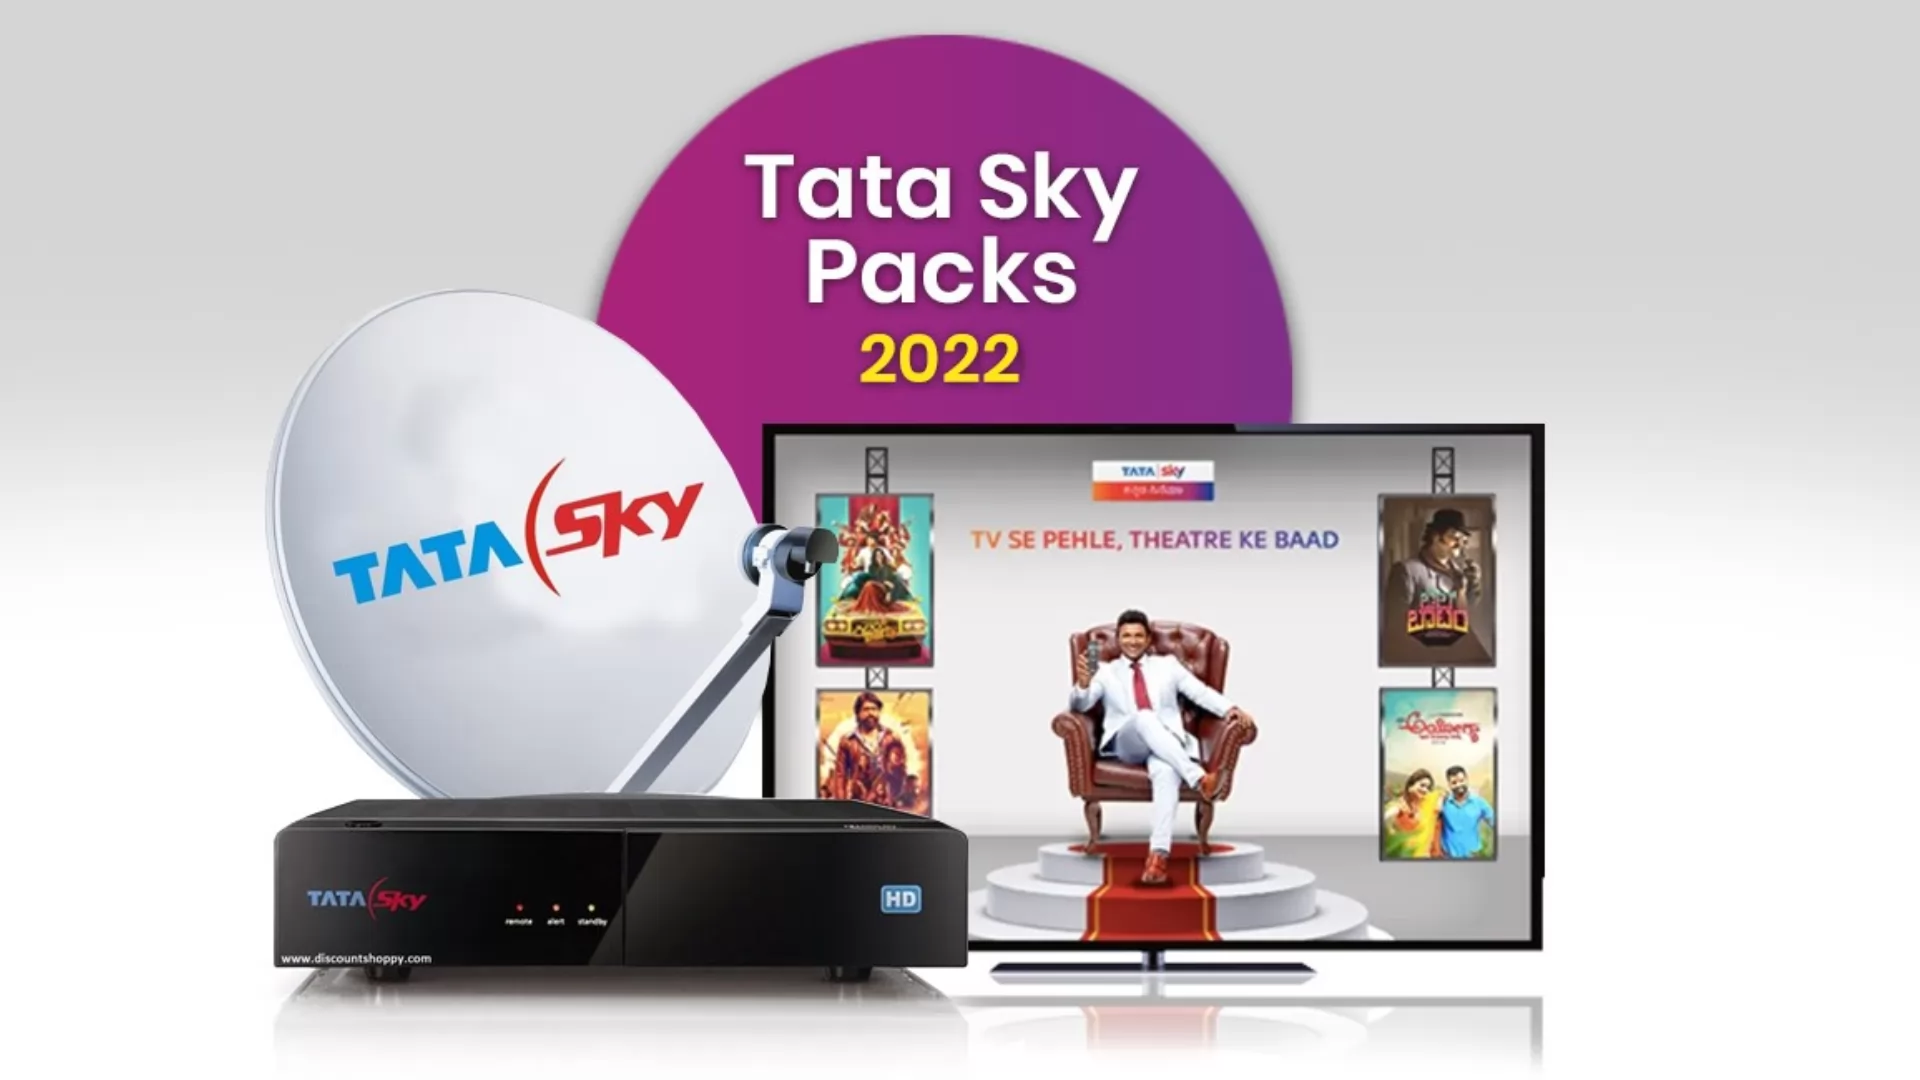 Tata Sky HD Packages Price List 